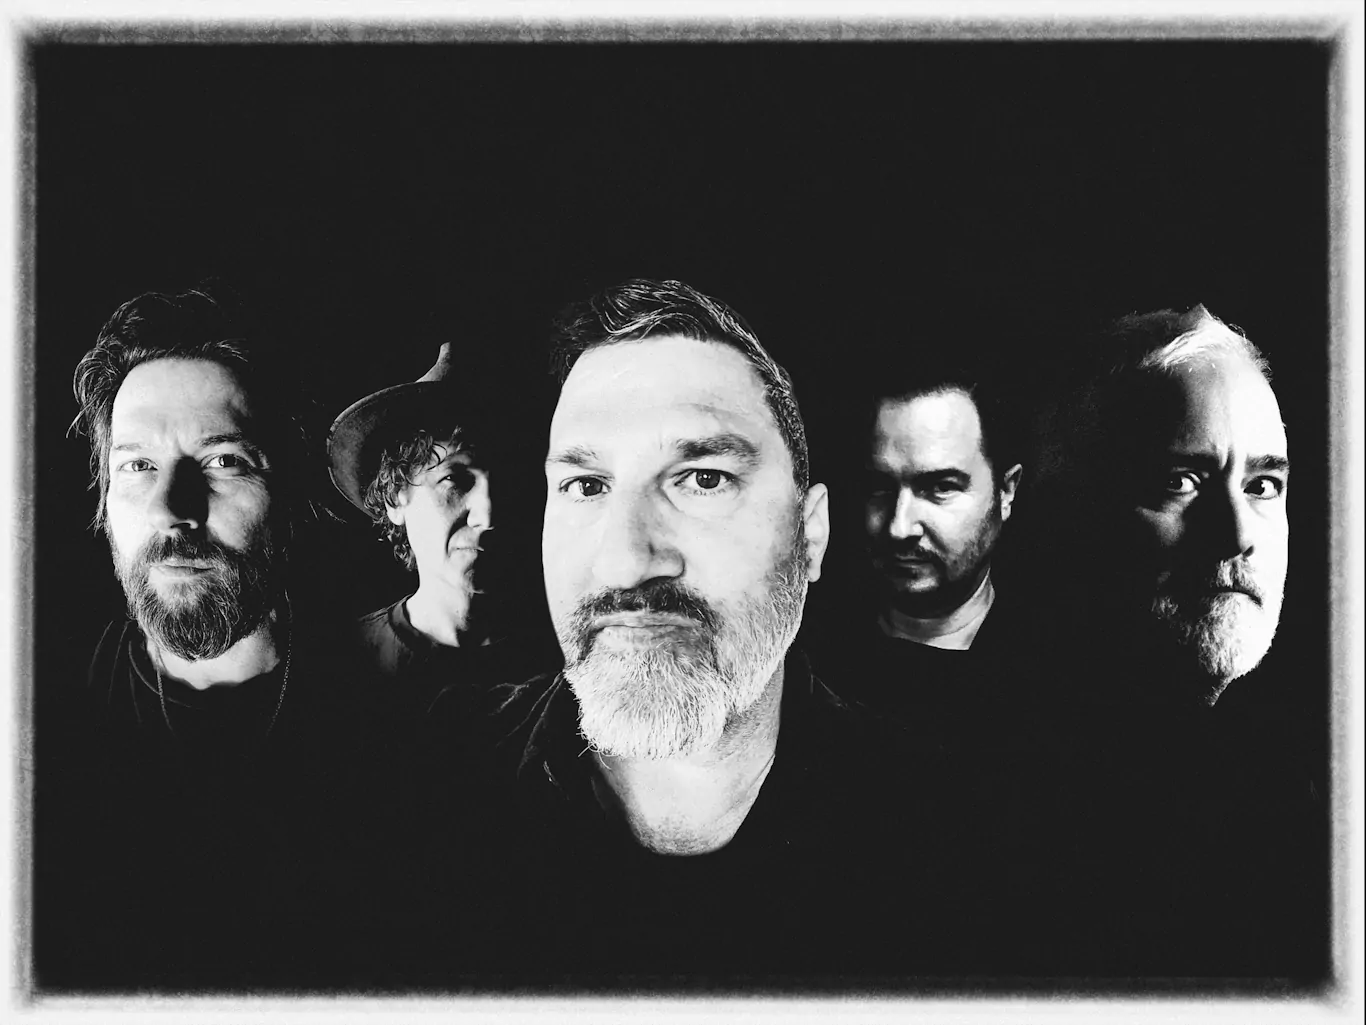 THE AFGHAN WHIGS return with their first album in five years ‘How Do You Burn?’